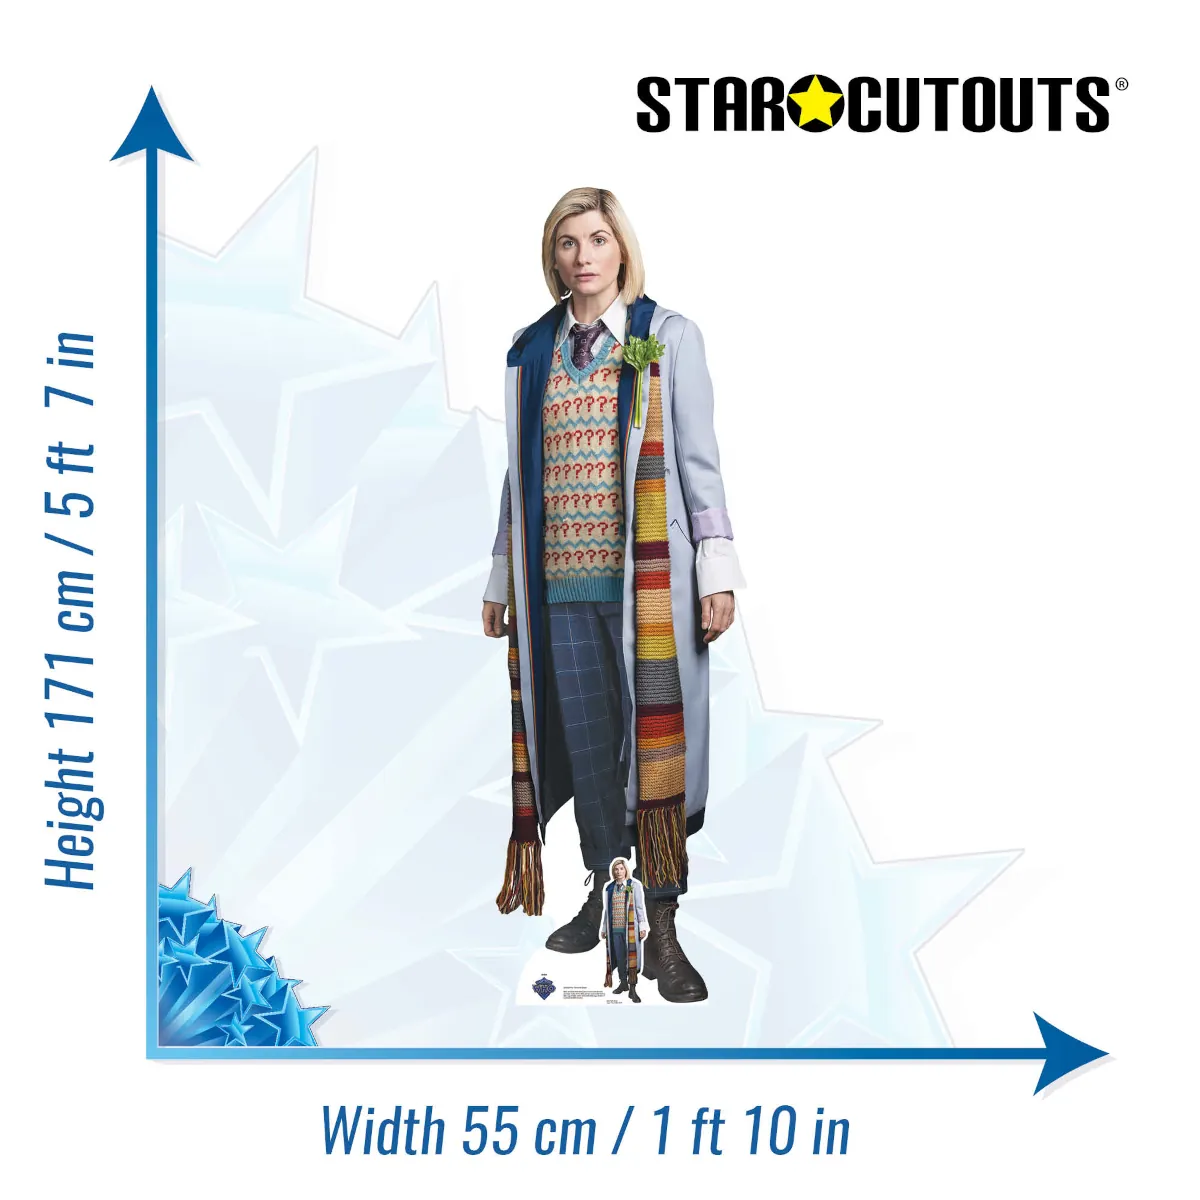 SC4229 The Thirteenth Doctor 'Jodie Whittaker' (Doctor Who) Lifesize + Mini Cardboard Cutout Standee Size